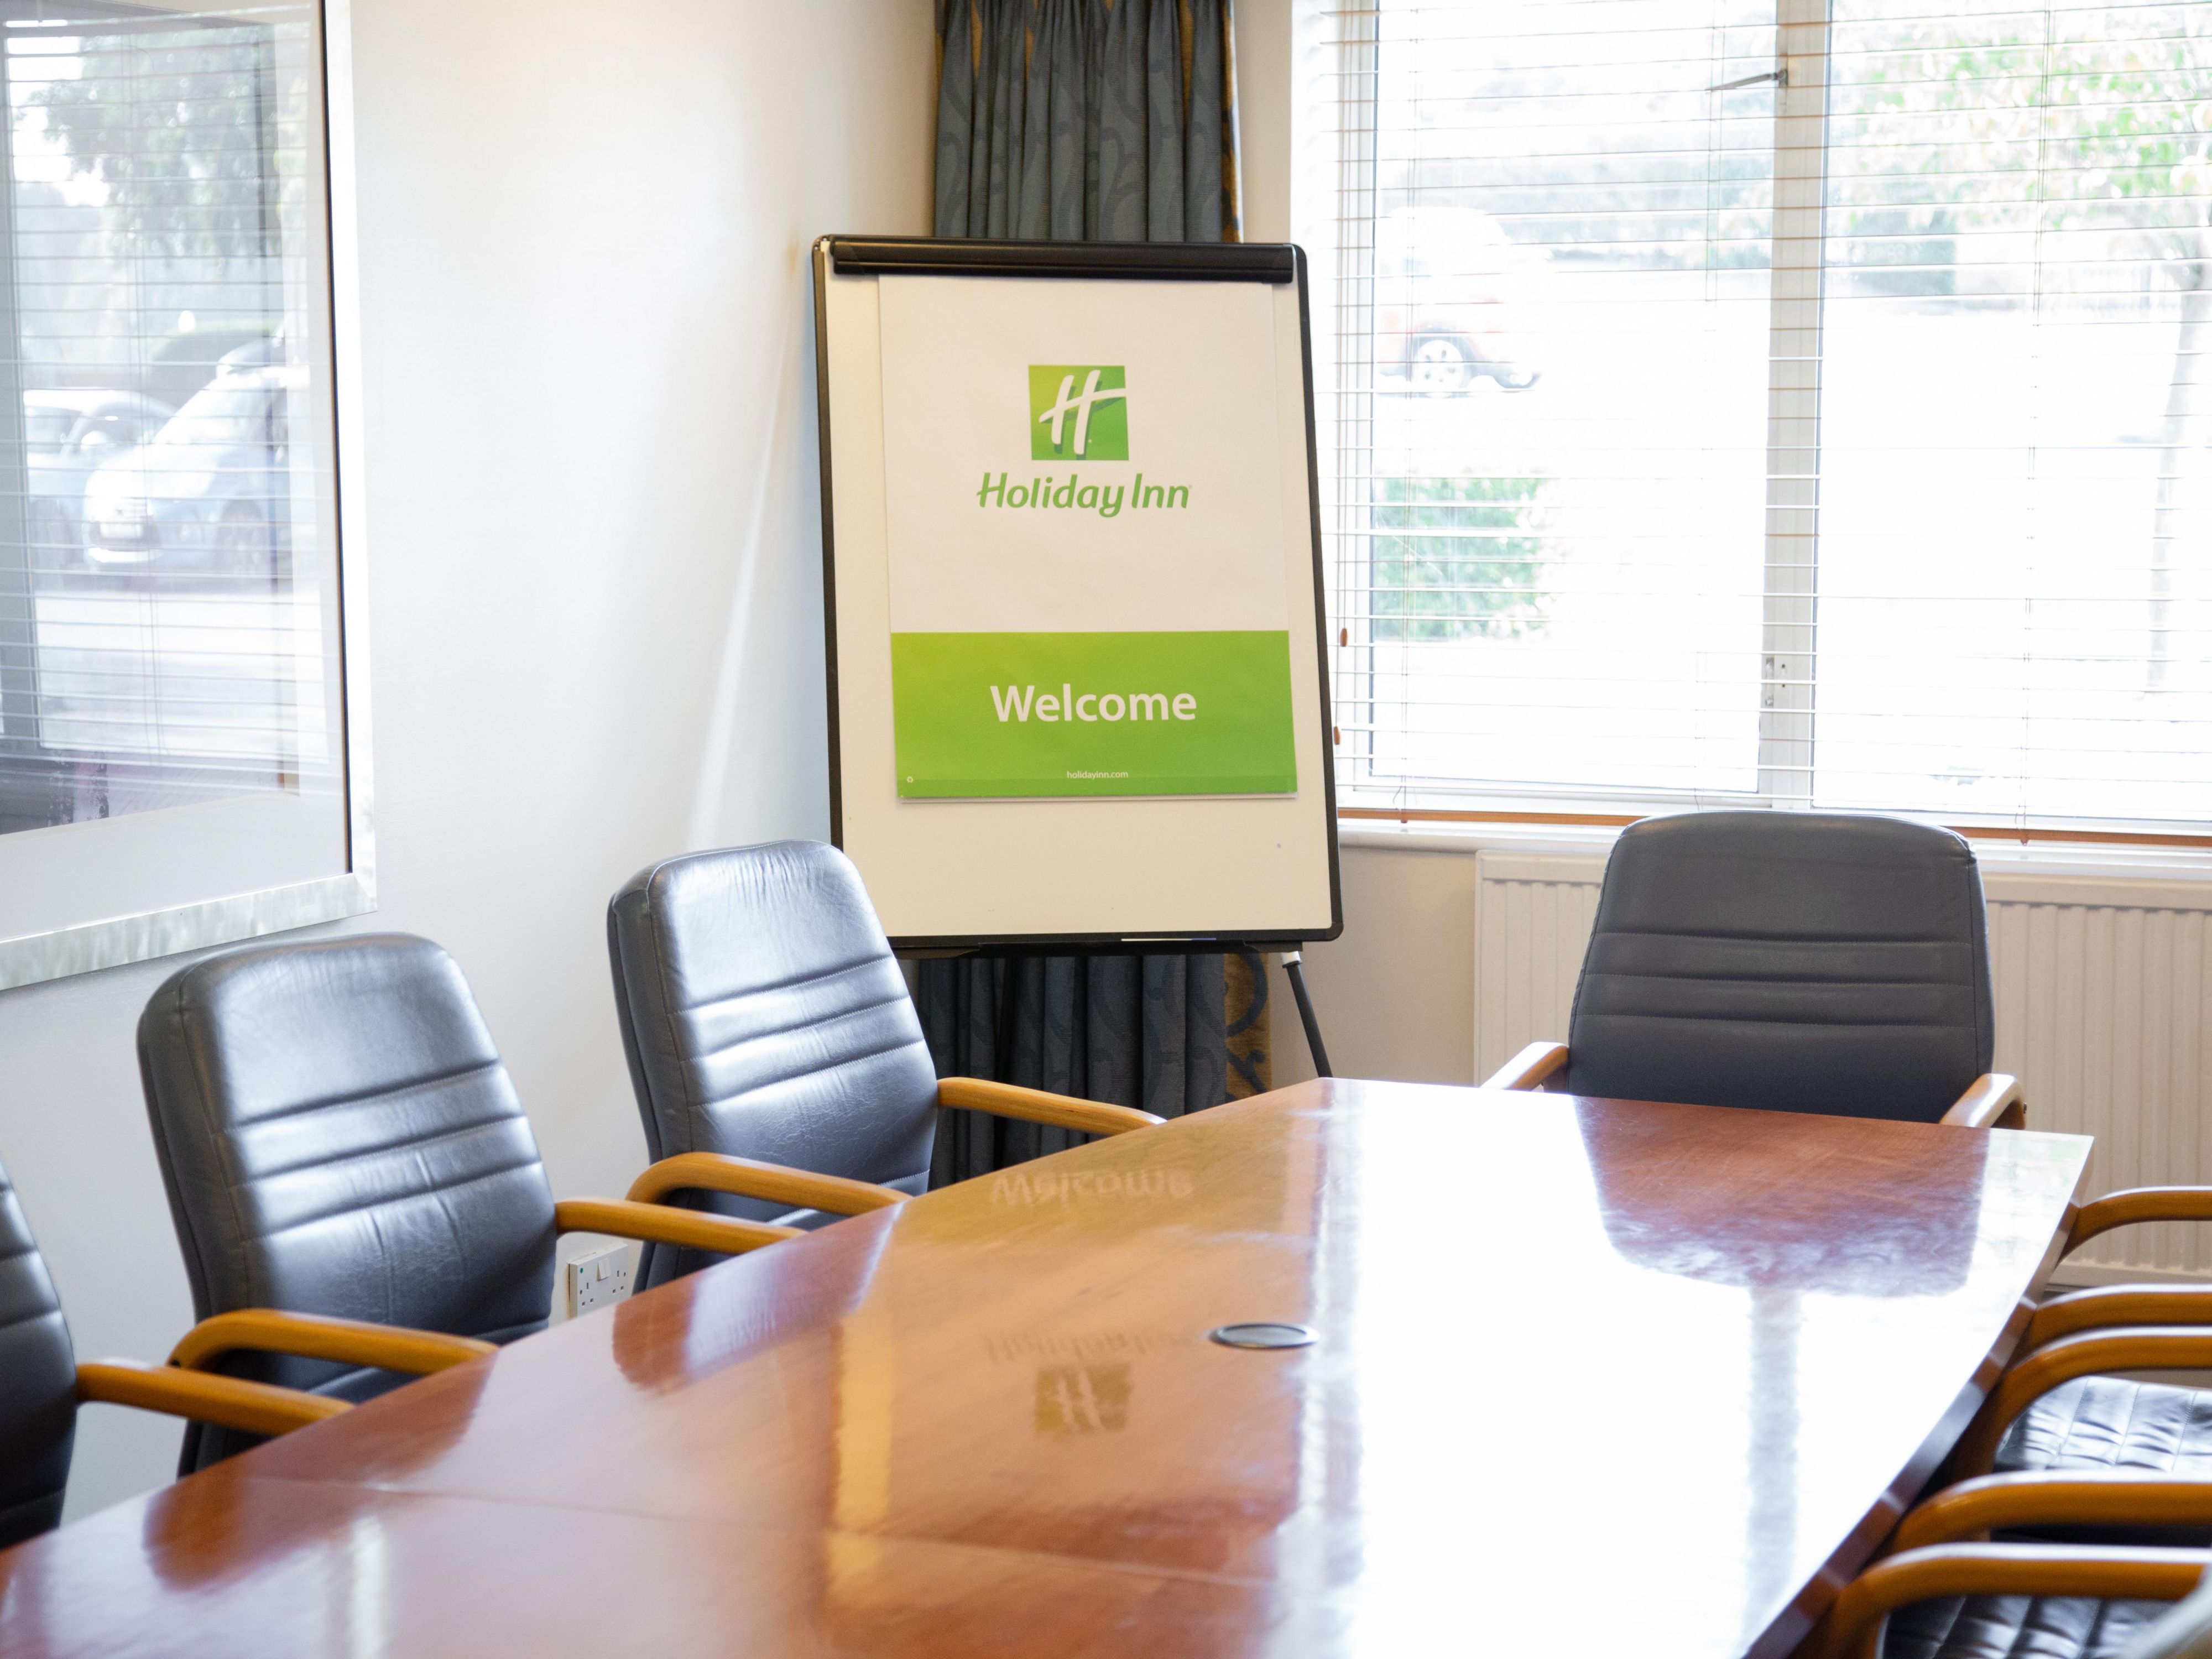 There are 8 naturally lit meeting rooms available for hire with modern facilities and complimentary Wi-Fi, the largest seating up to 125 delegates theatre-style. Take a break and have drinks in the Open Lobby and choose from a range of catering options.